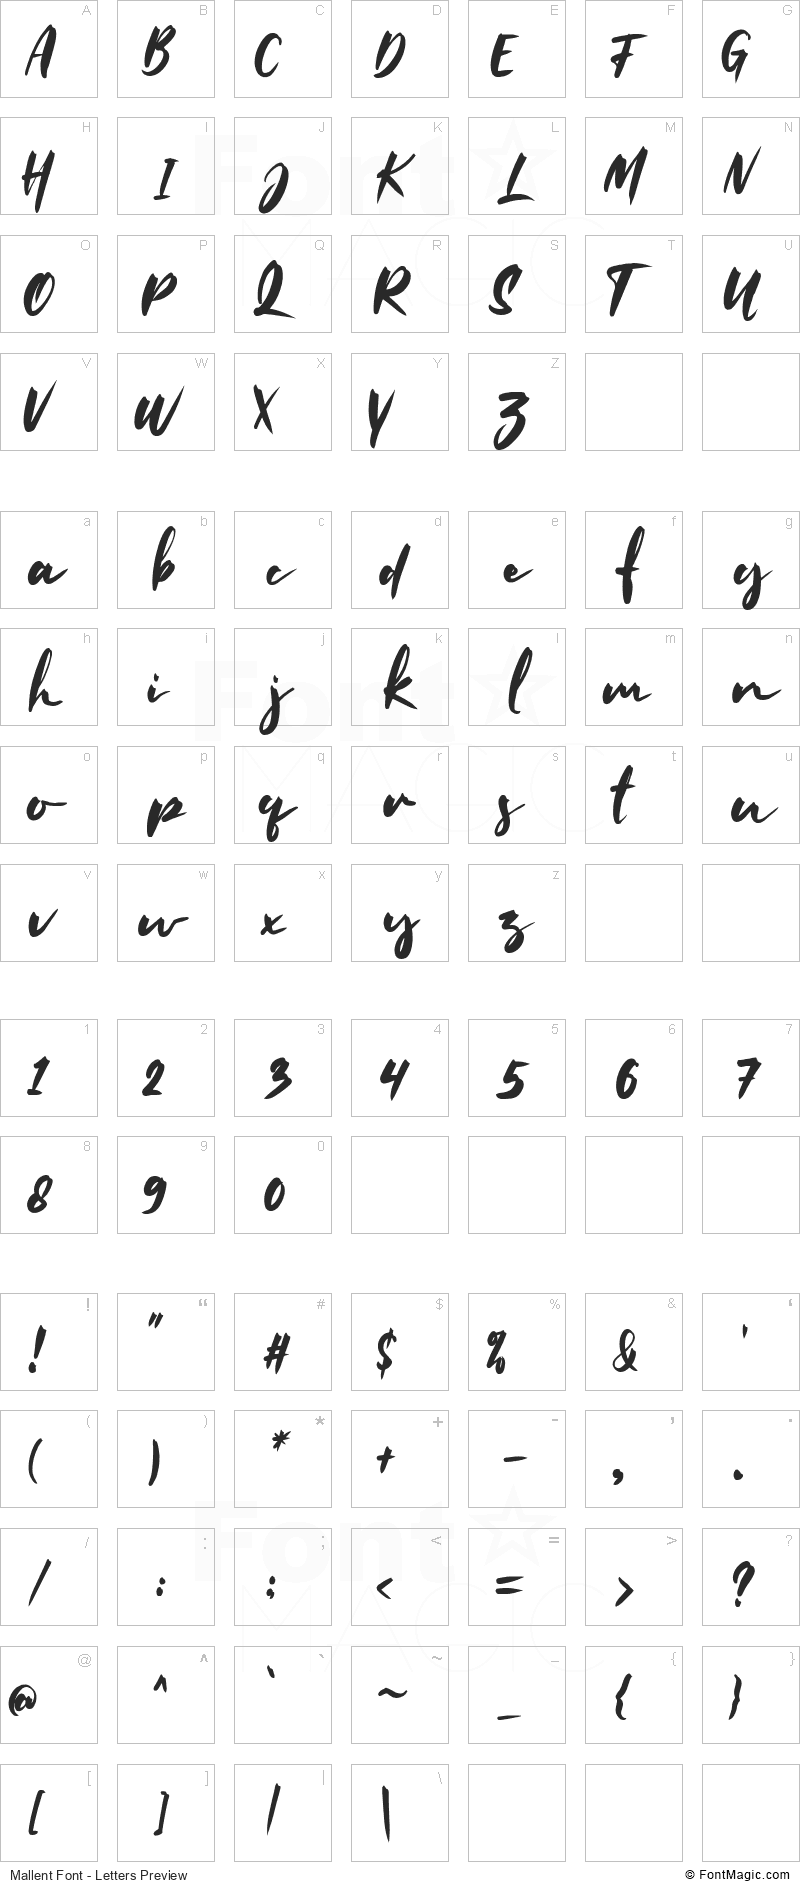 Mallent Font - All Latters Preview Chart